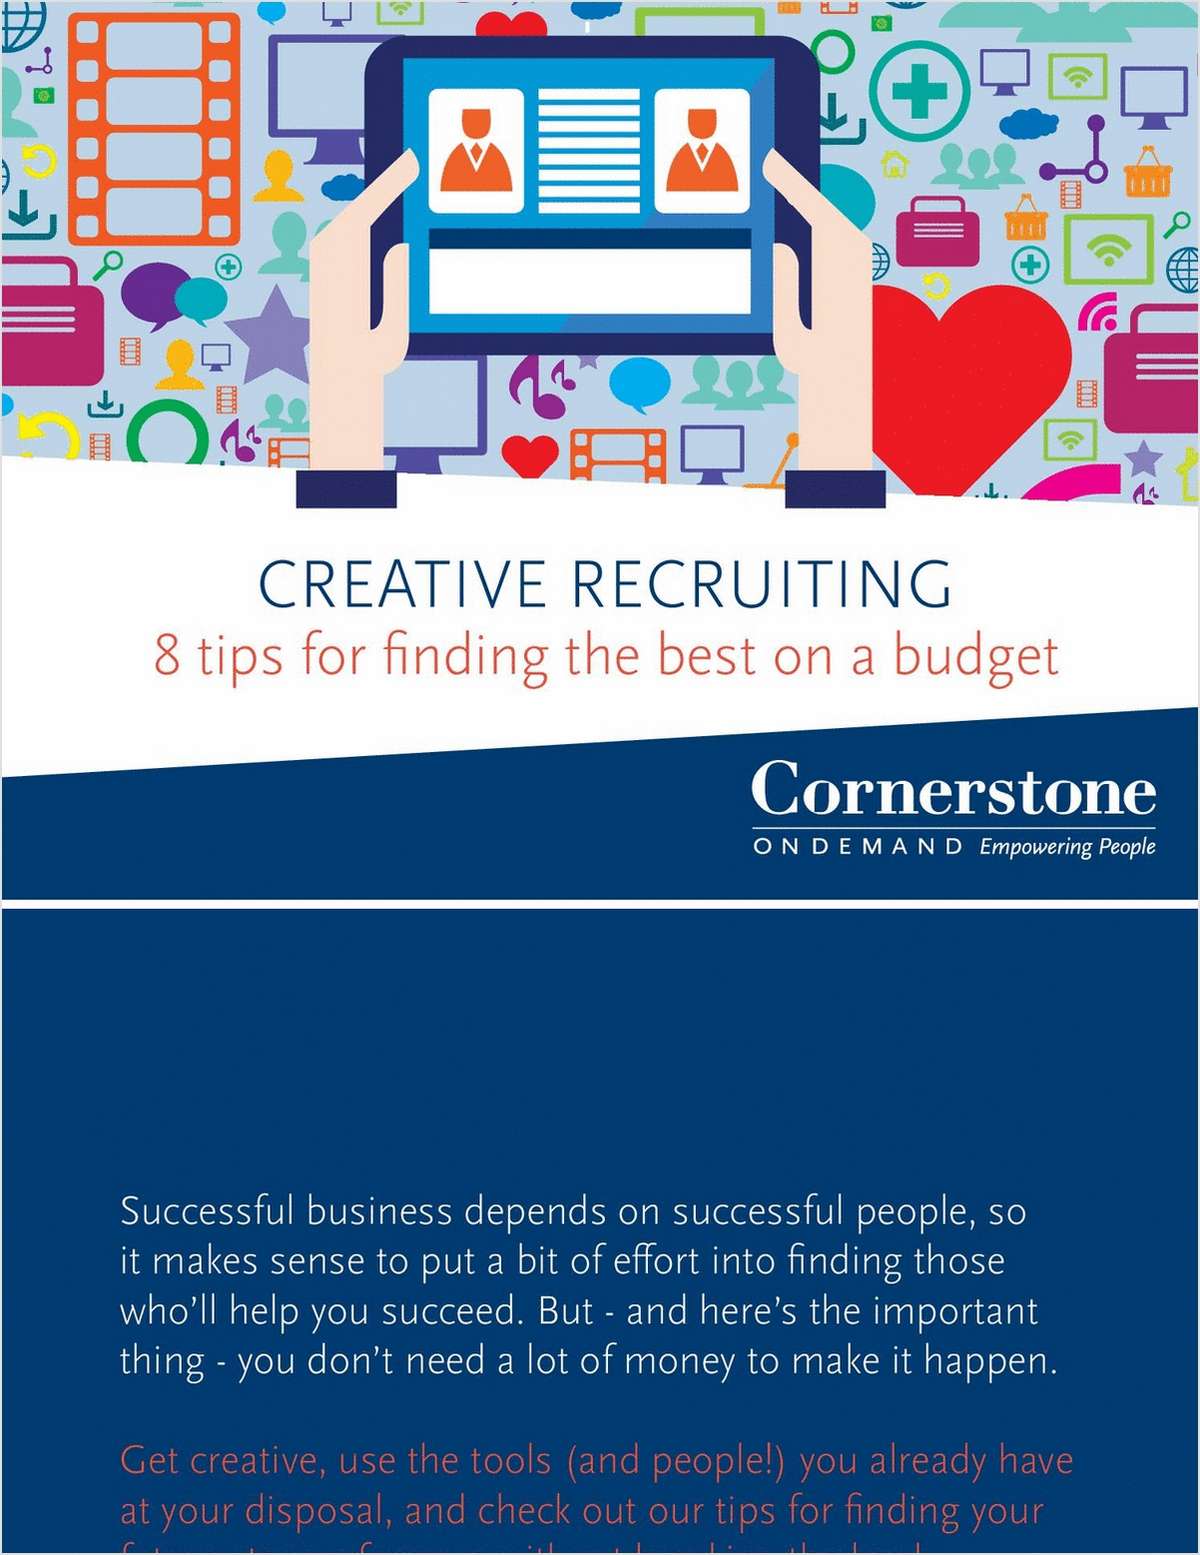 Creative Recruiting: 8 Tips for Finding the Best on a Budget